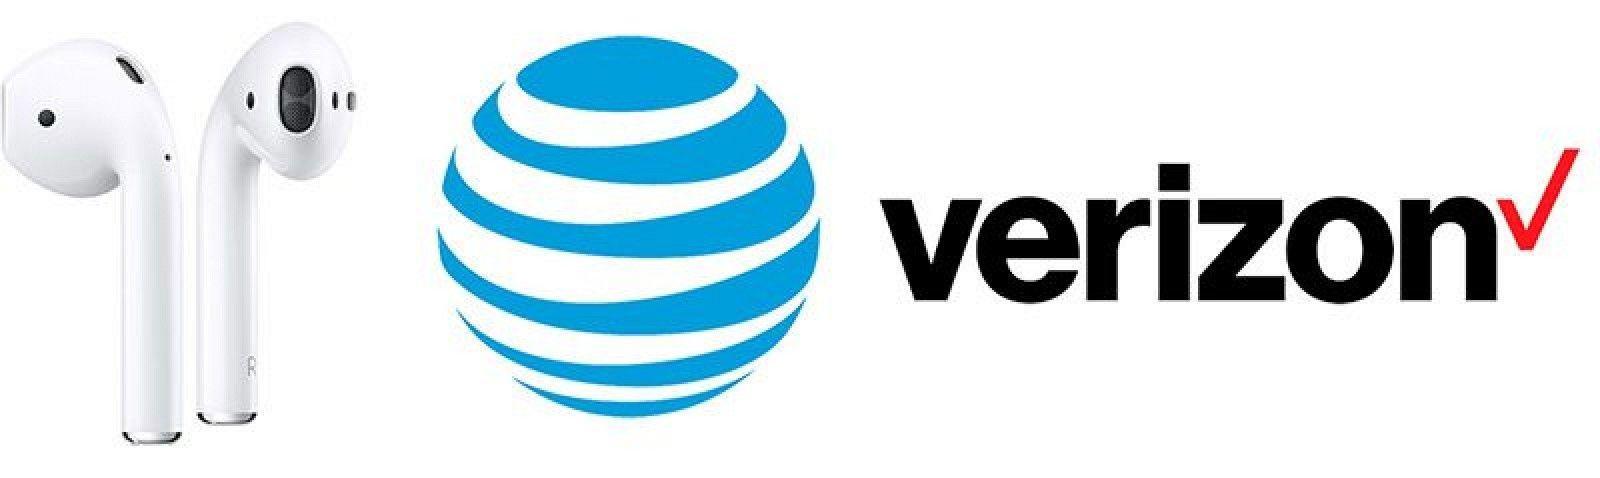 Verizon AT&T Logo - AirPods In Stock at AT&T and Verizon With Free 2-5 Day Delivery ...